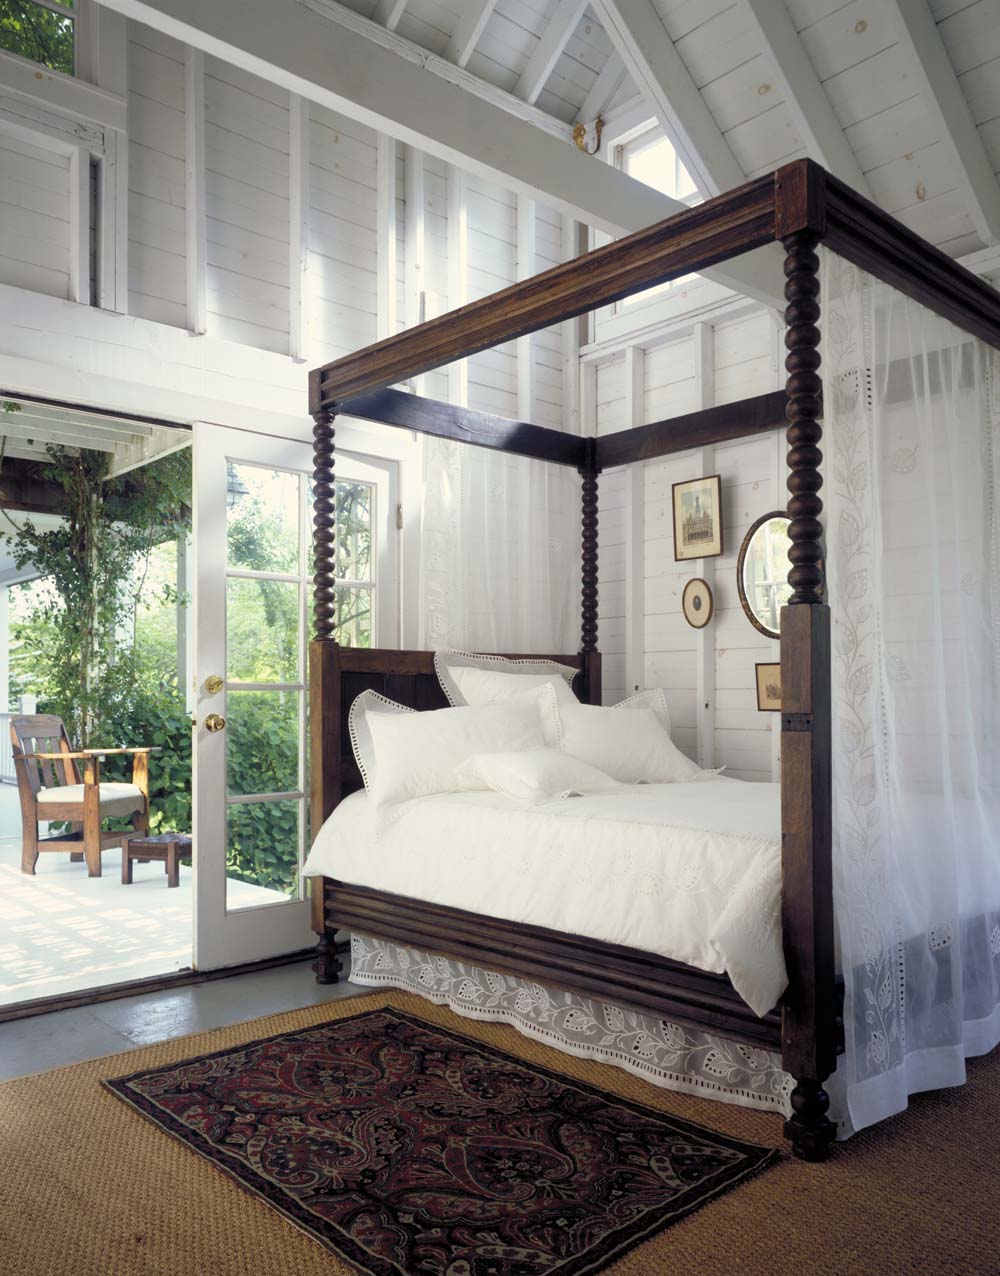 A heavy wood canopy bed with a twisty, spiral design